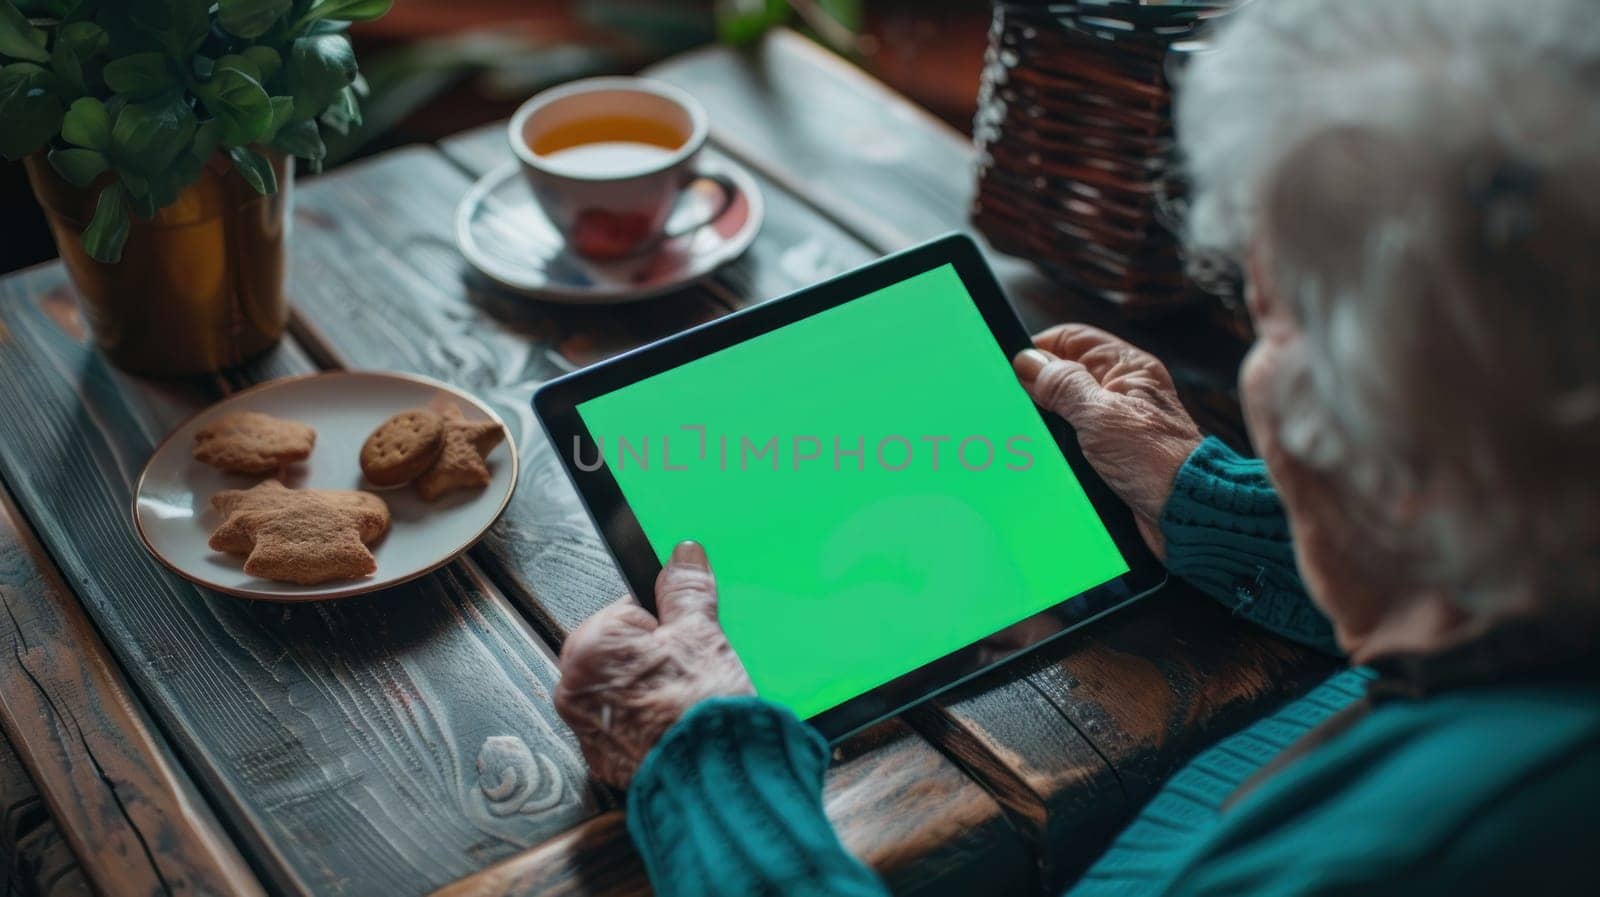 Close-Up of Tablet with Green Screen Held by Old Woman Leaning Against Table with Cup of Tea and Cookies Concept Technology and Comfort.